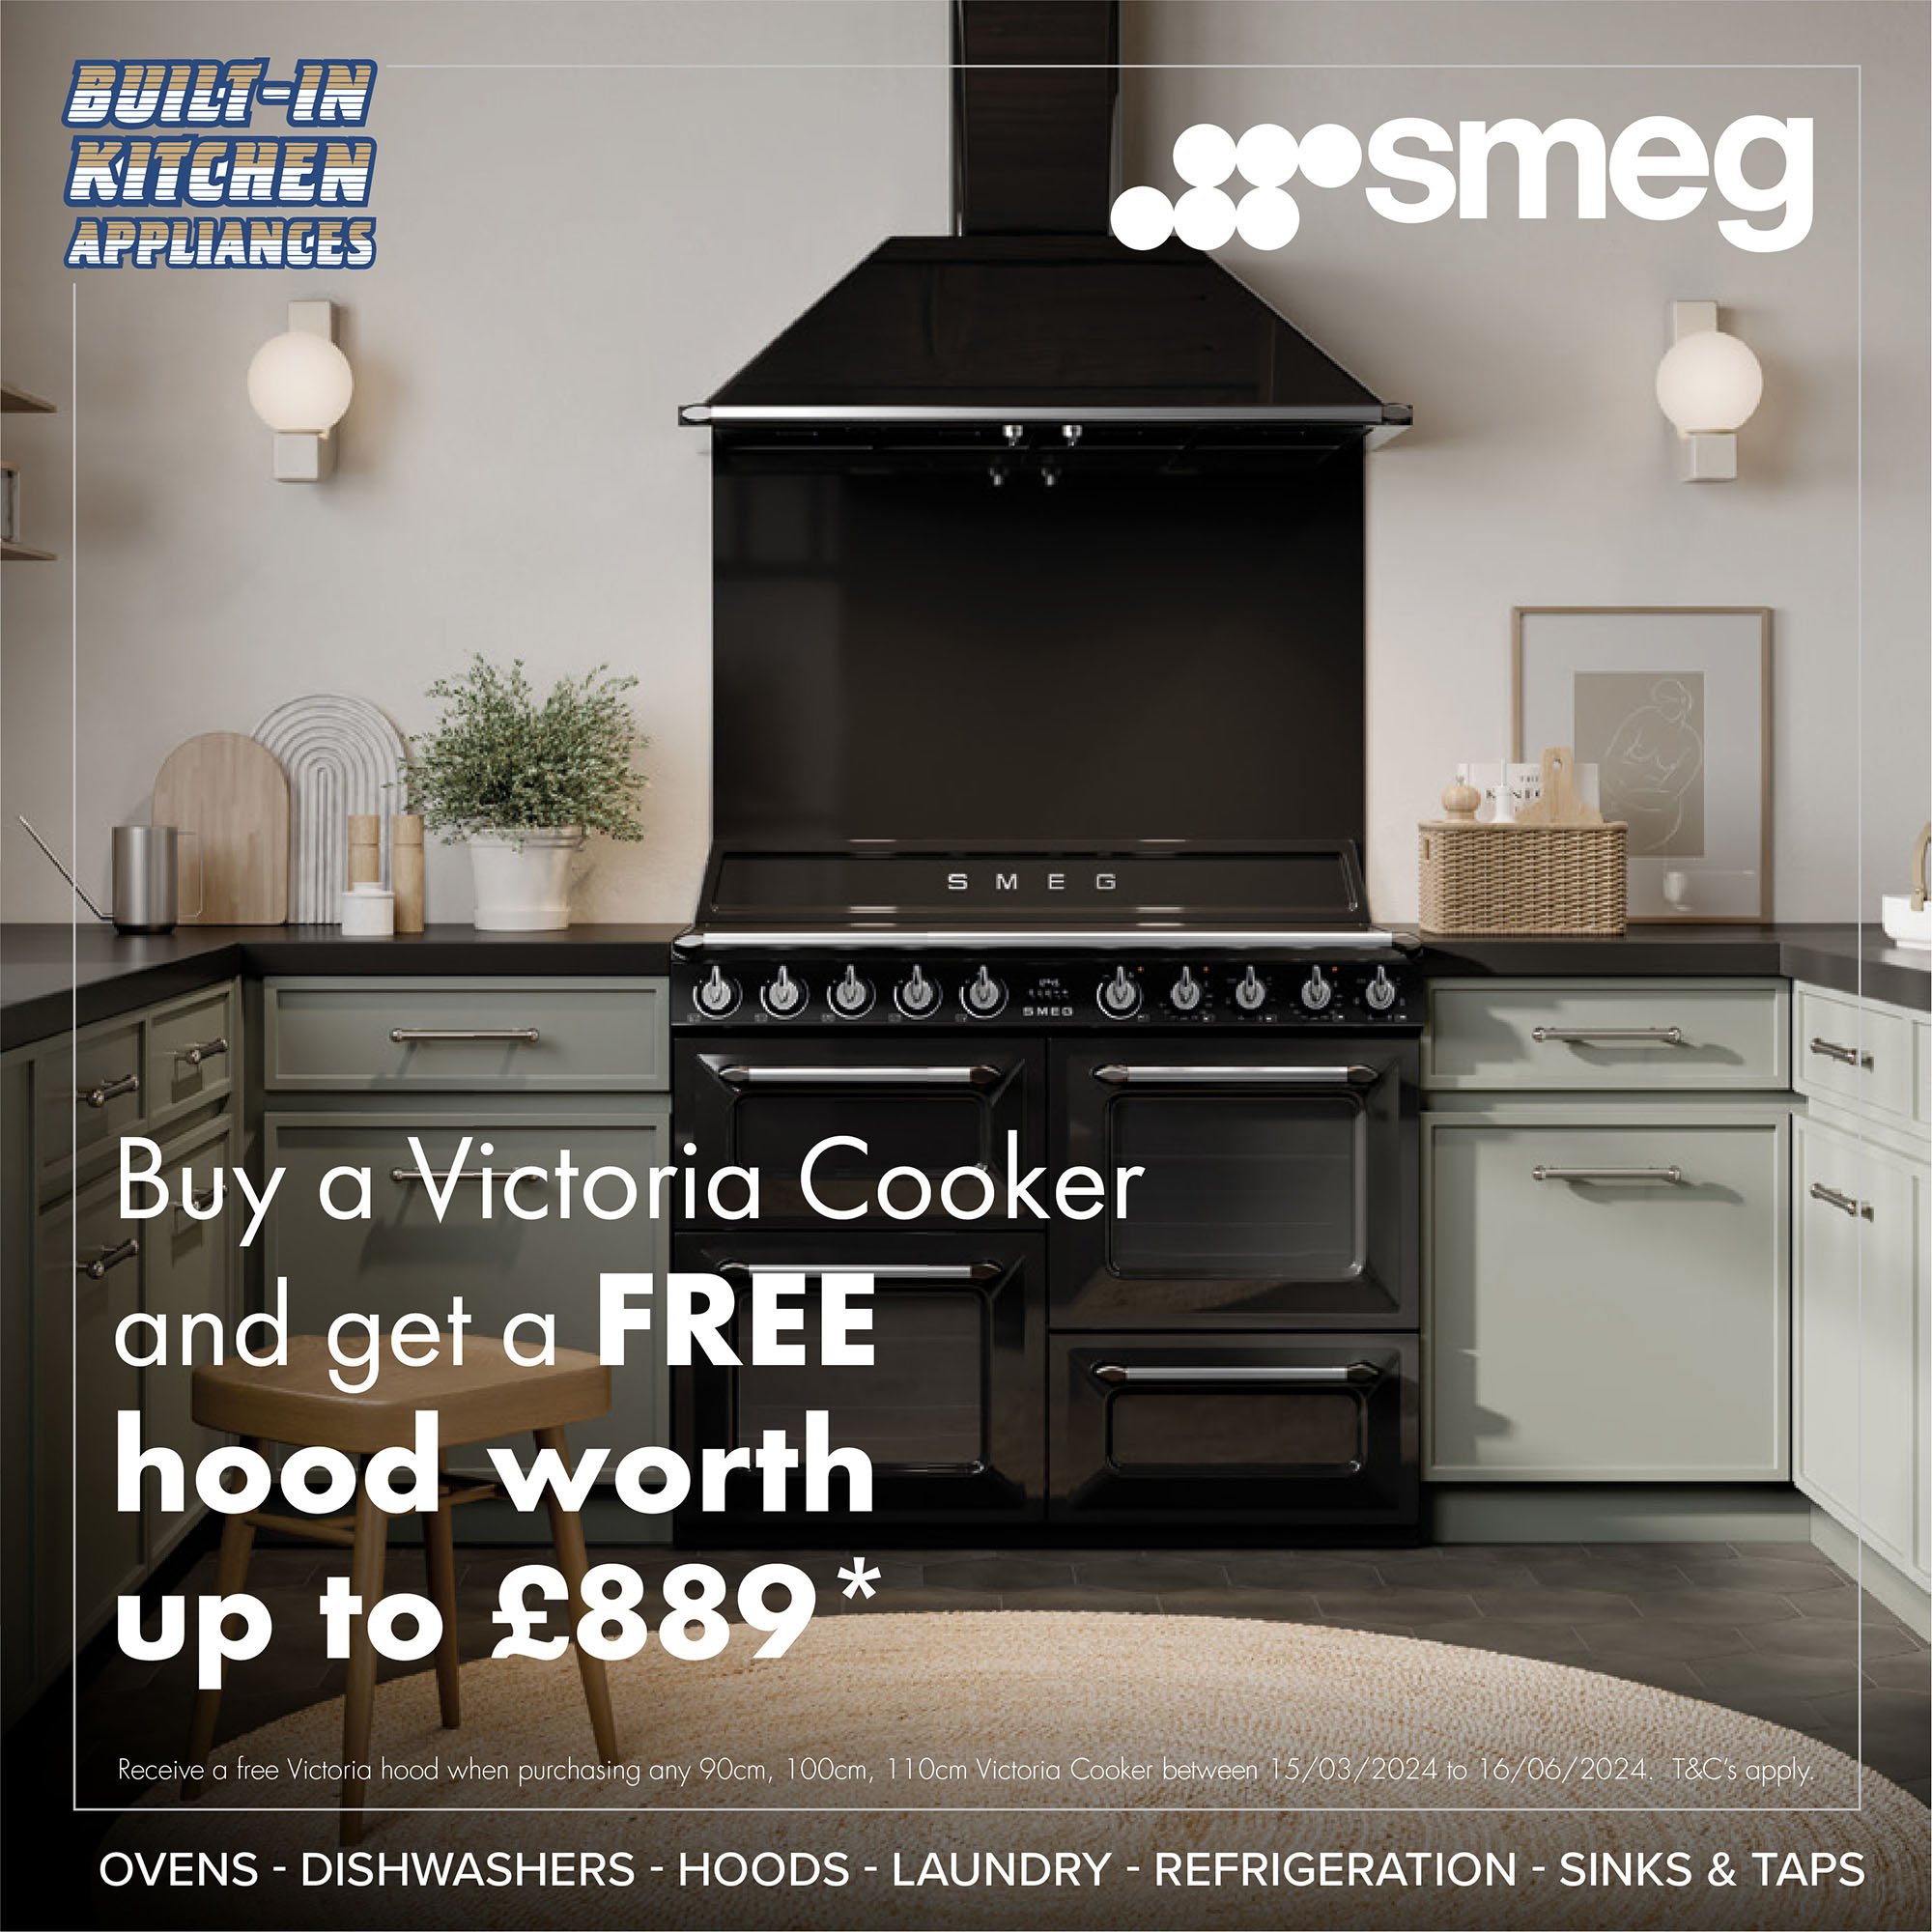 Get FREE hood with smeg Victoria Cooker - Ends  16-06-24